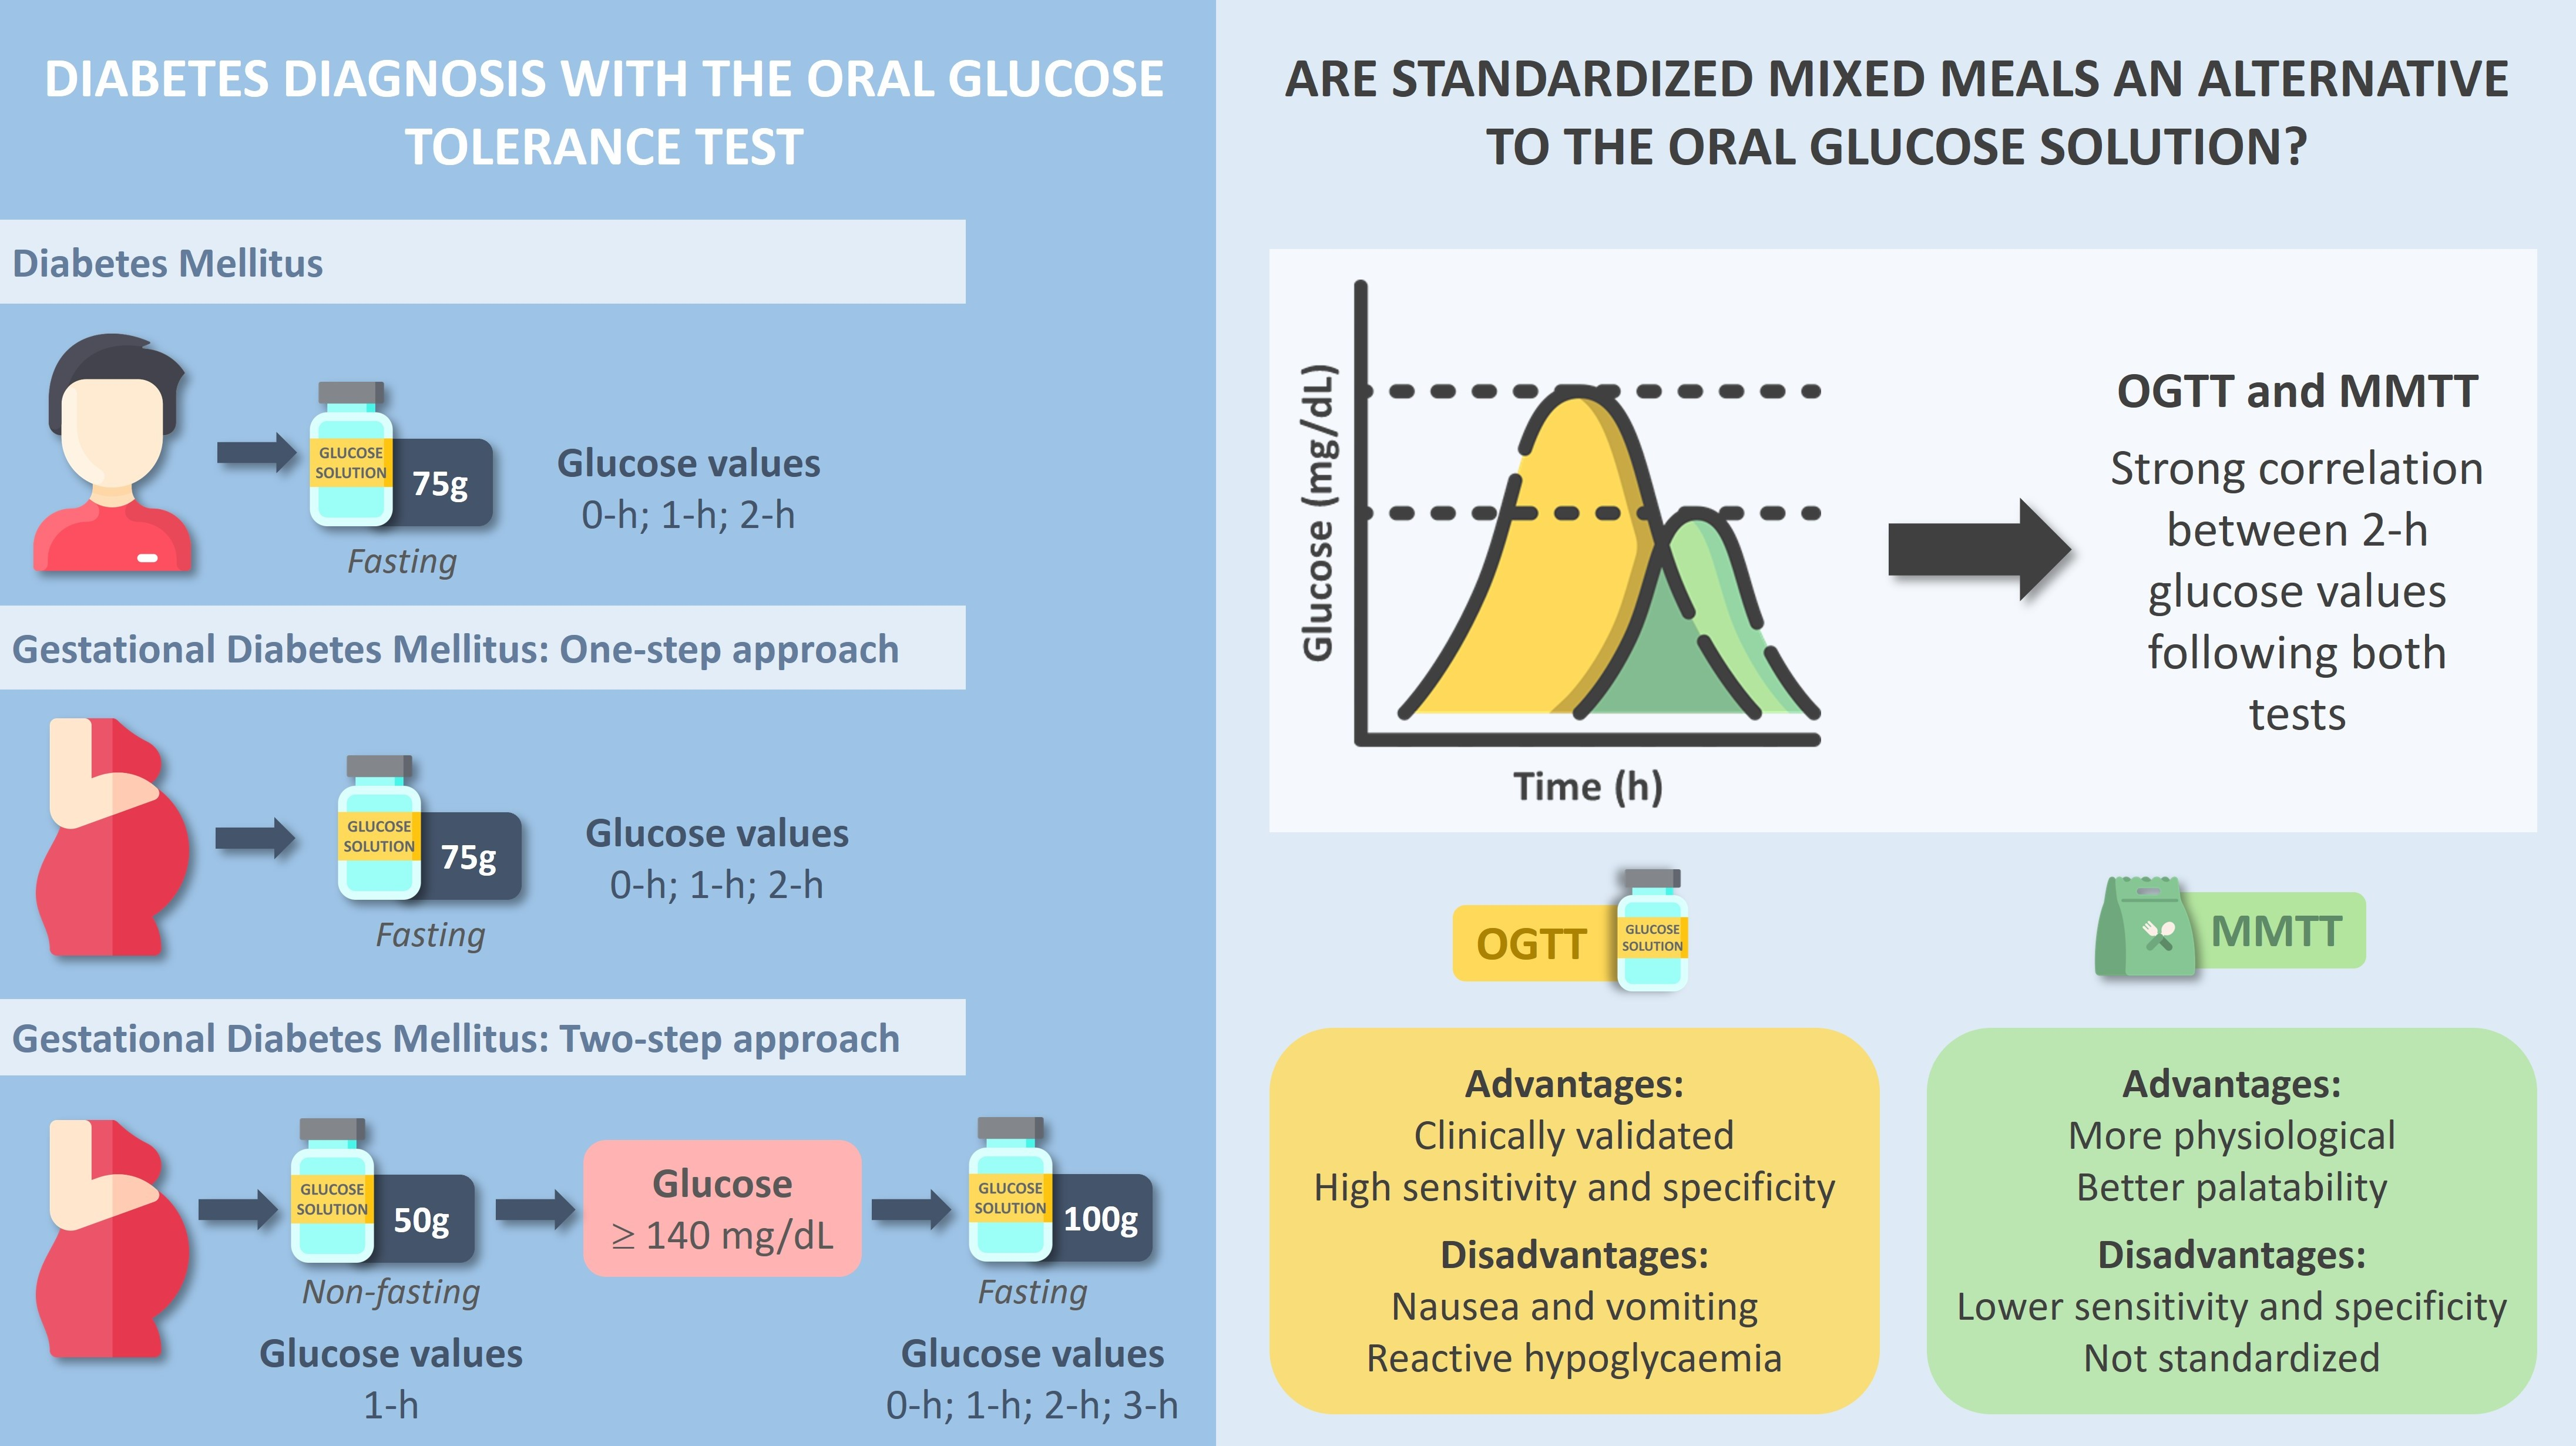 Nutrients | Free Full-Text | Metabolic Effects of an Oral Glucose Tolerance Test to the Mixed Tolerance Tests: A Narrative Review